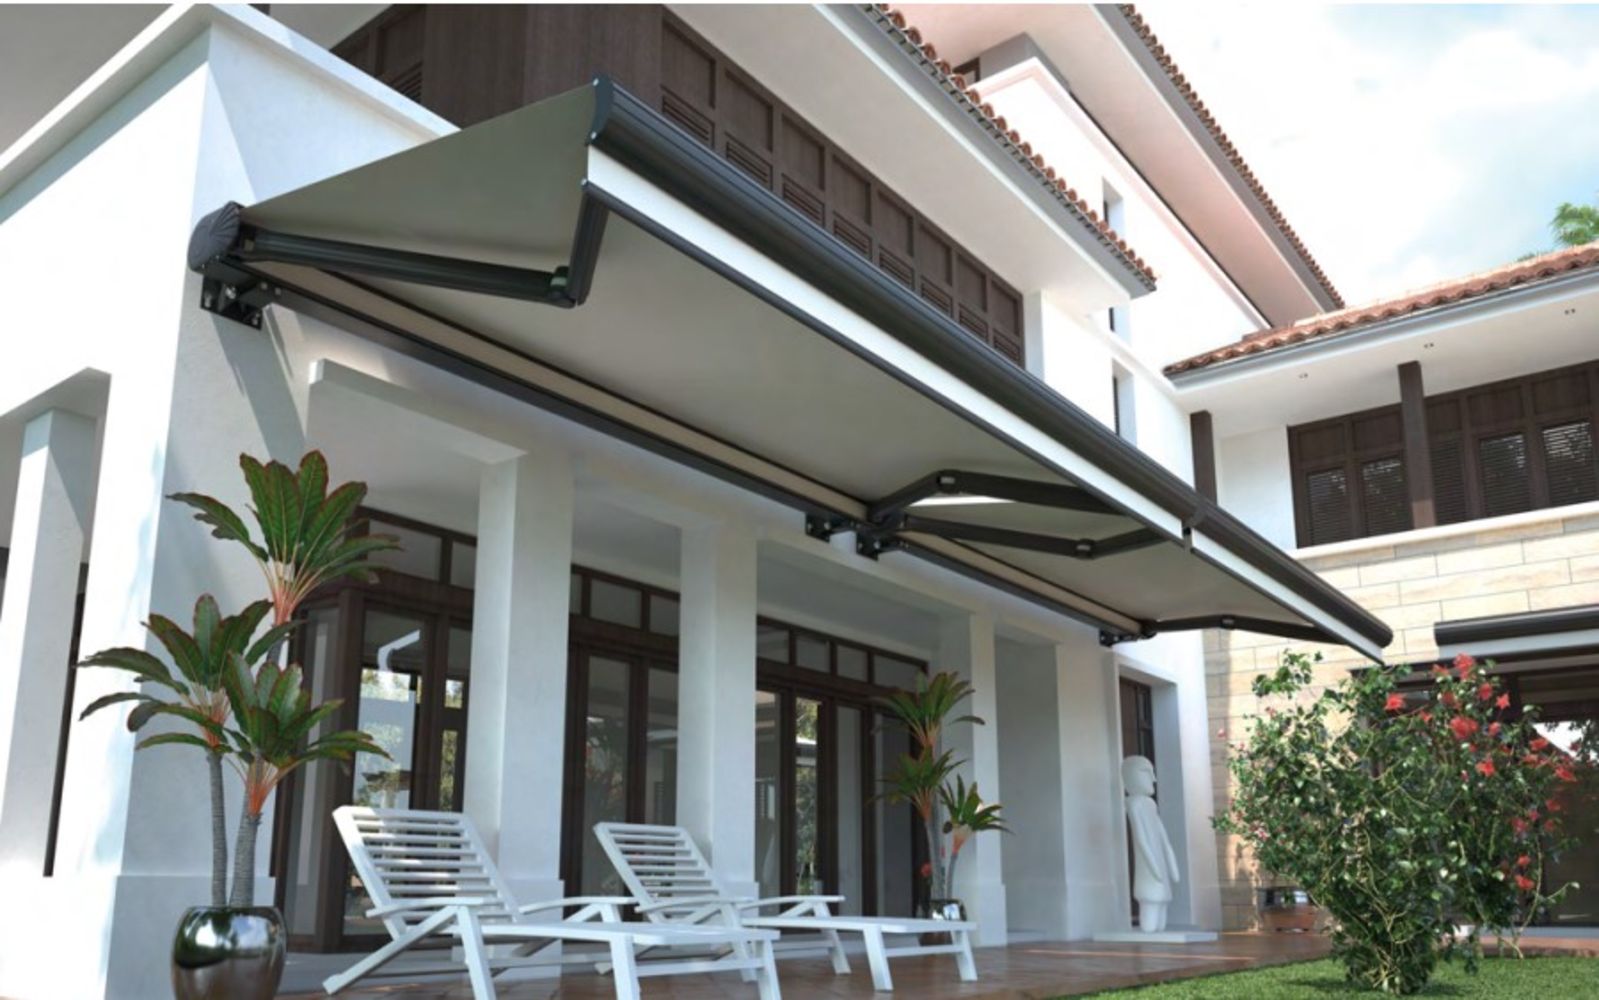 Off site Stock liquidation of High quality New Awnings as sold in Costco only 10% buyer premium!!!